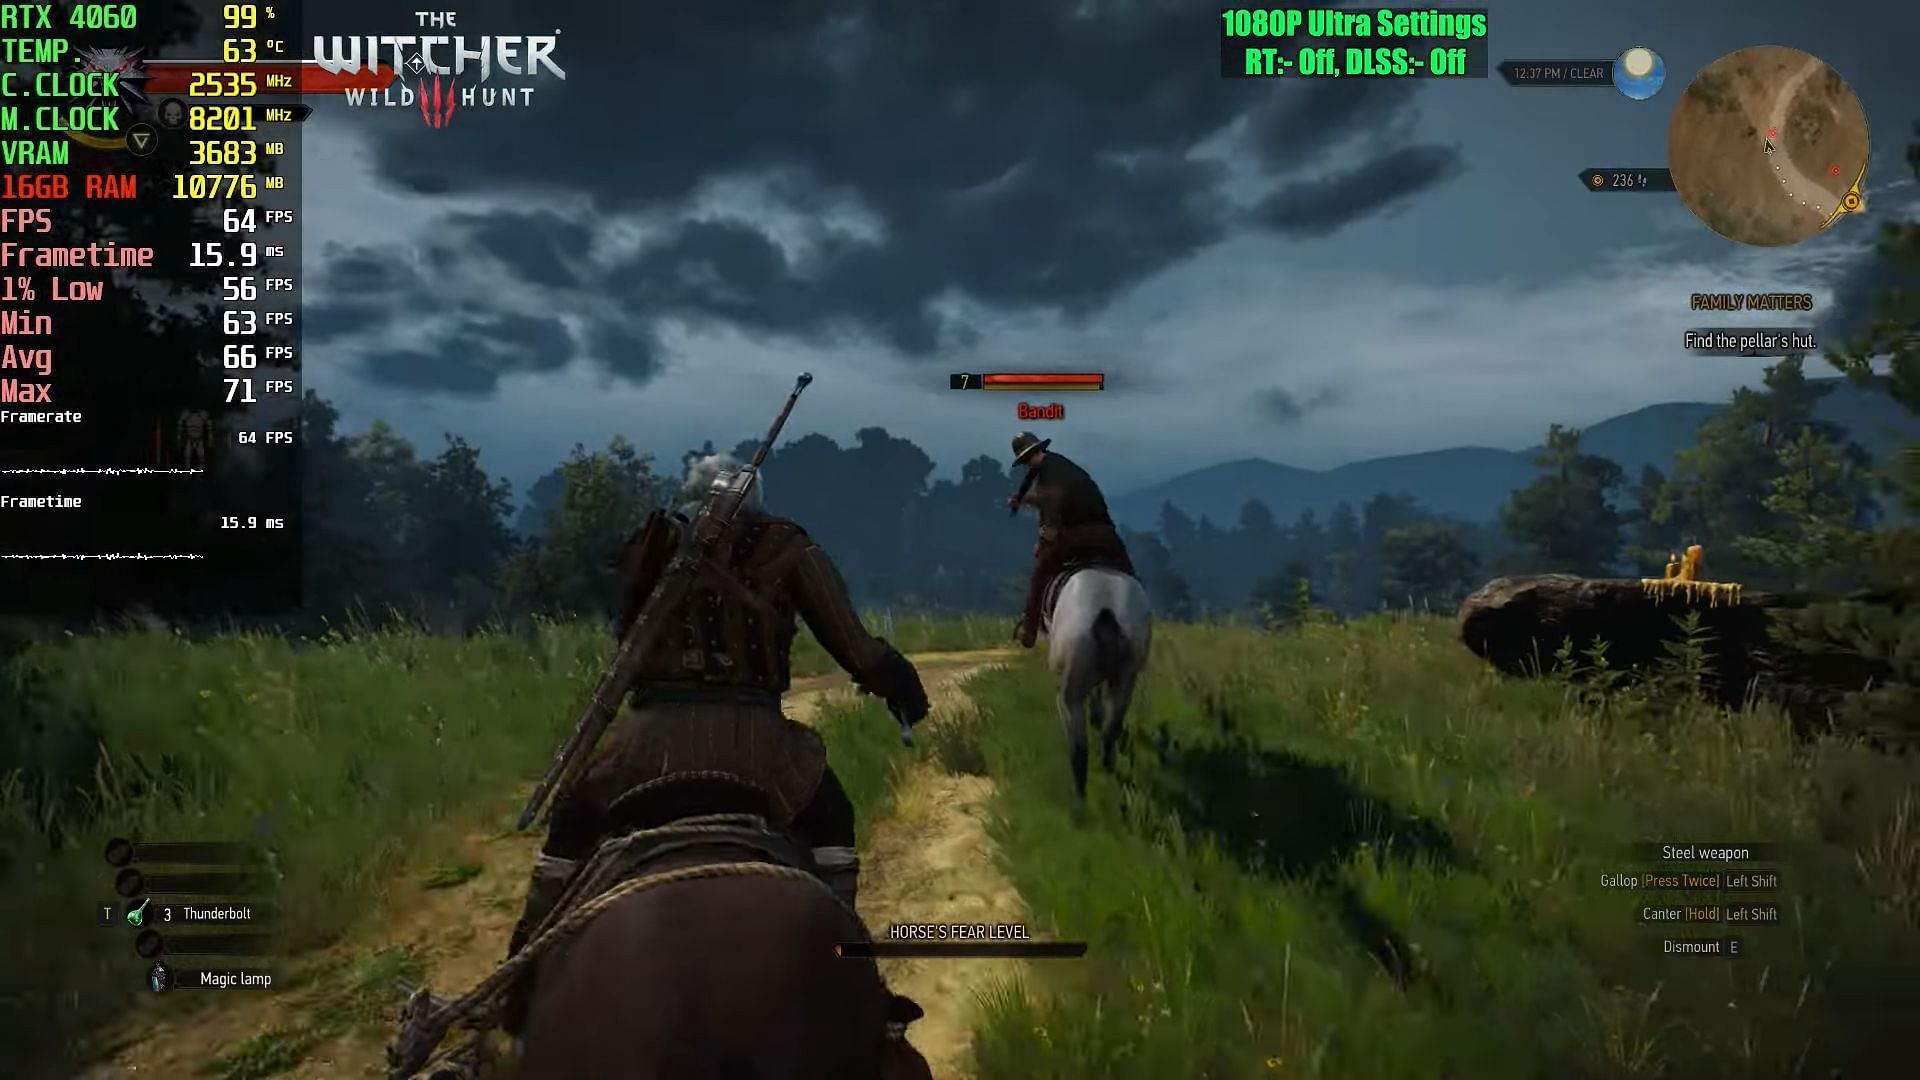 Witcher 3 Next-Gen running on RTX 4060 delivering 66 FPS on average (Image via PC Support &amp; Gaming Test channel/YouTube)